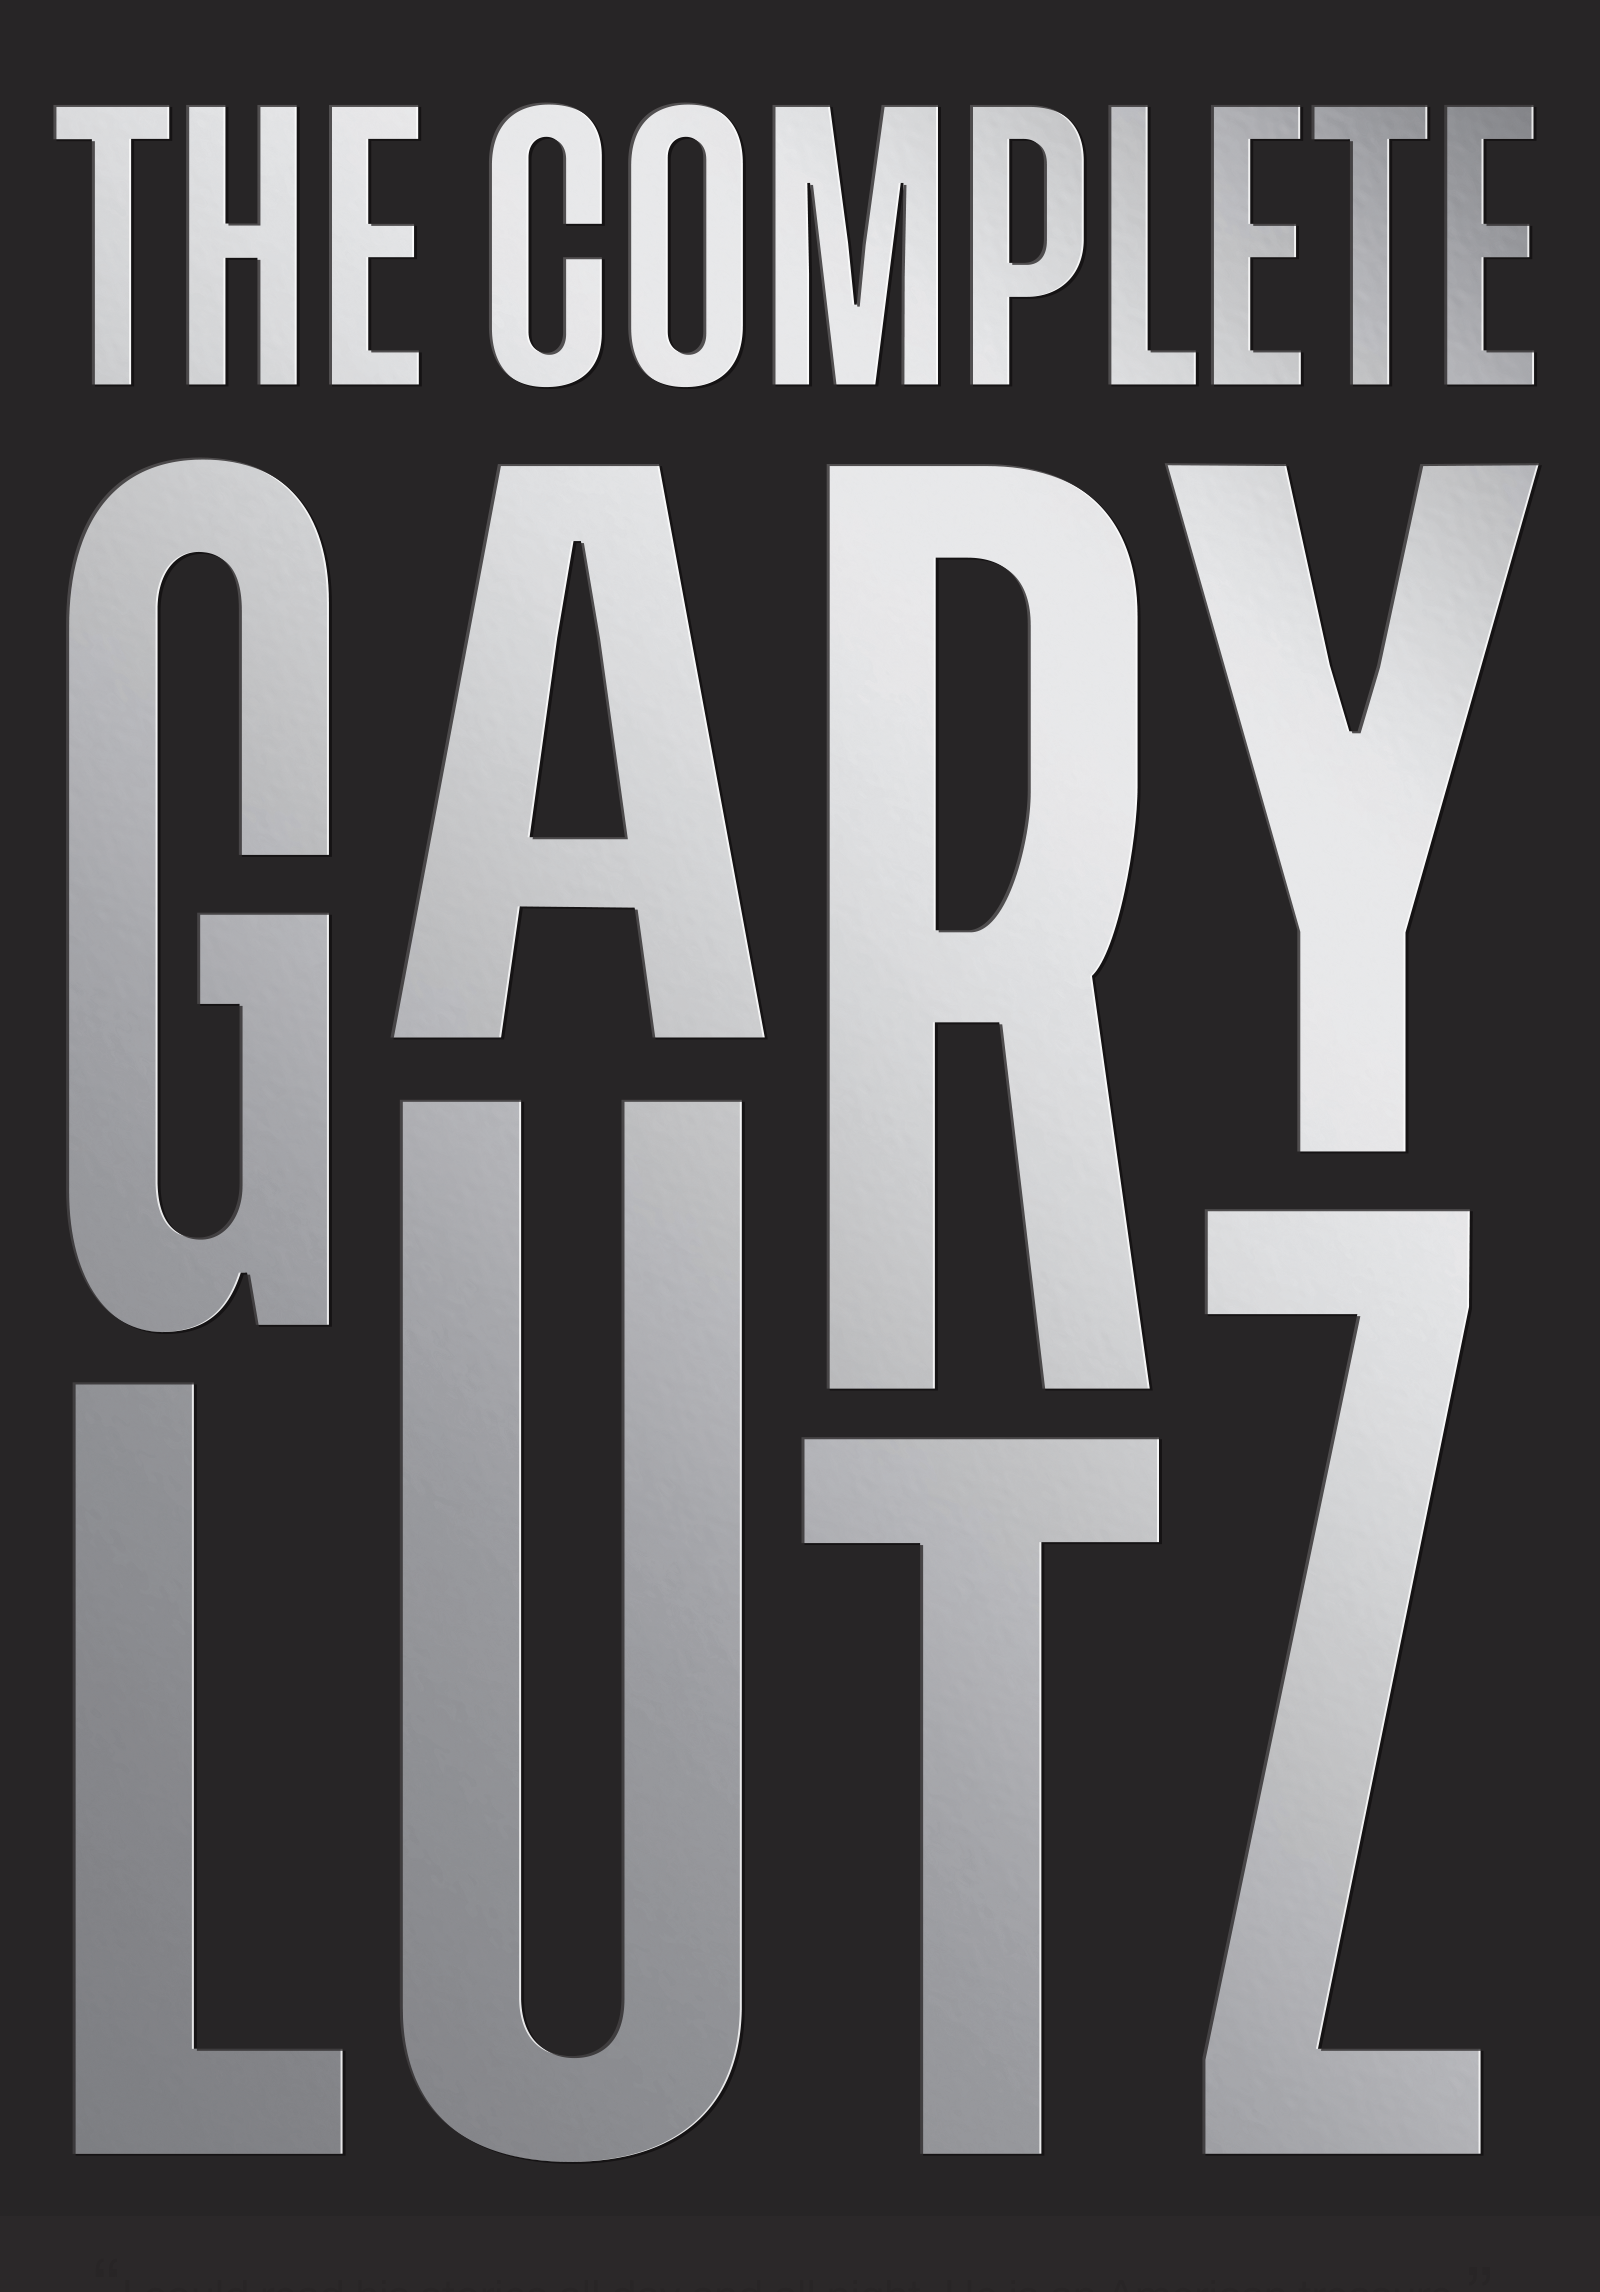 The Mind’s Ear: An Interview with Gary Lutz